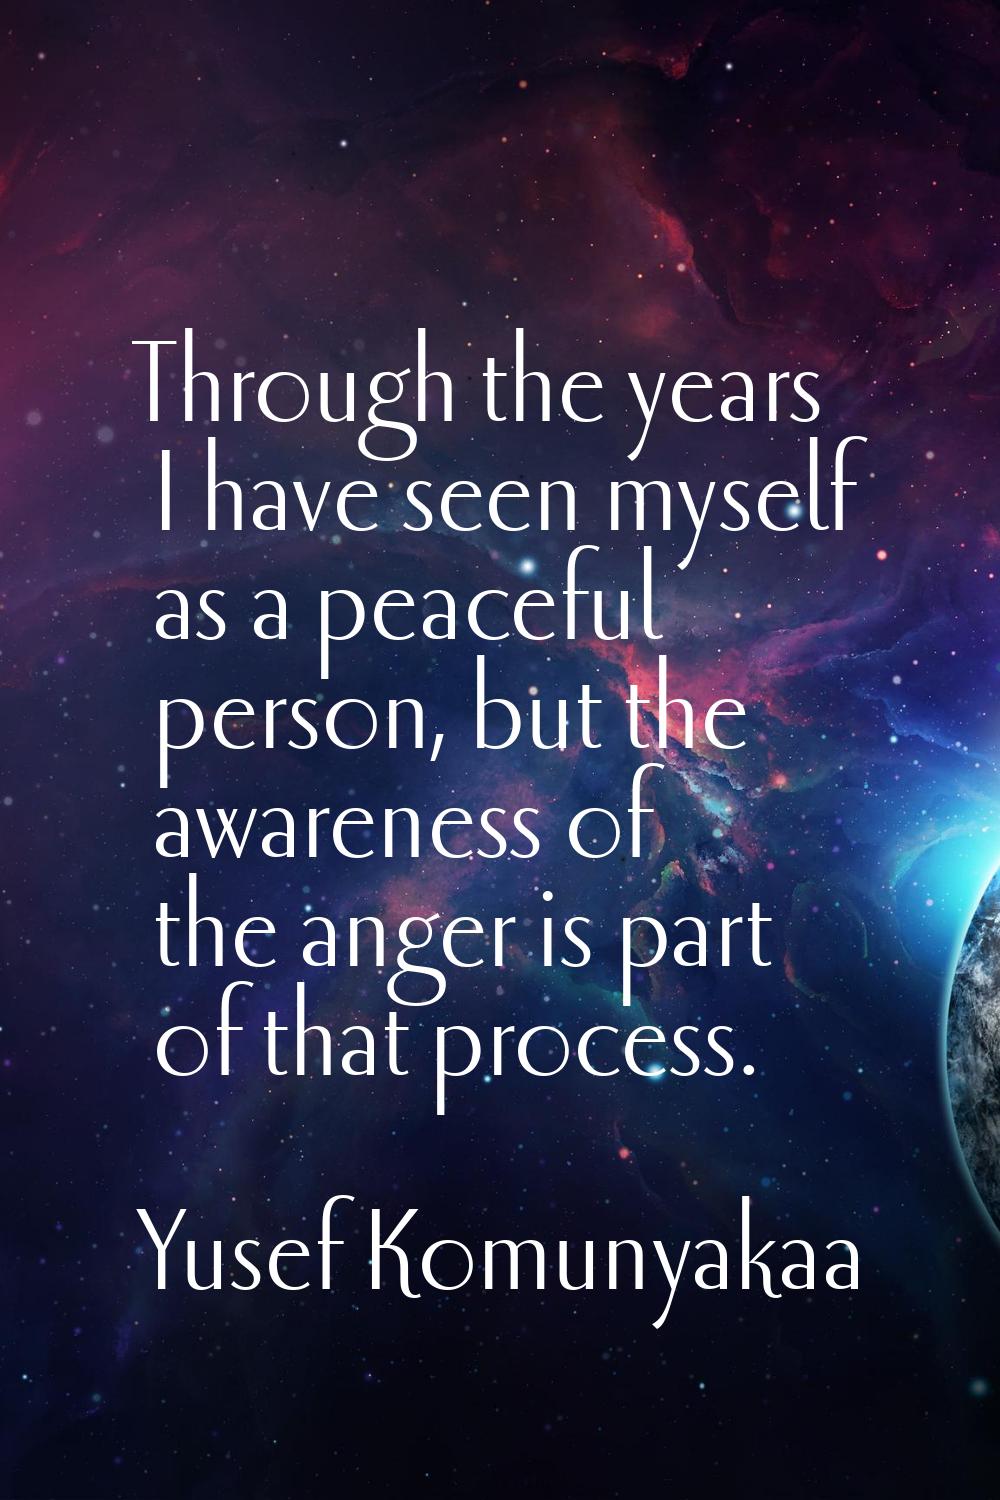 Through the years I have seen myself as a peaceful person, but the awareness of the anger is part o